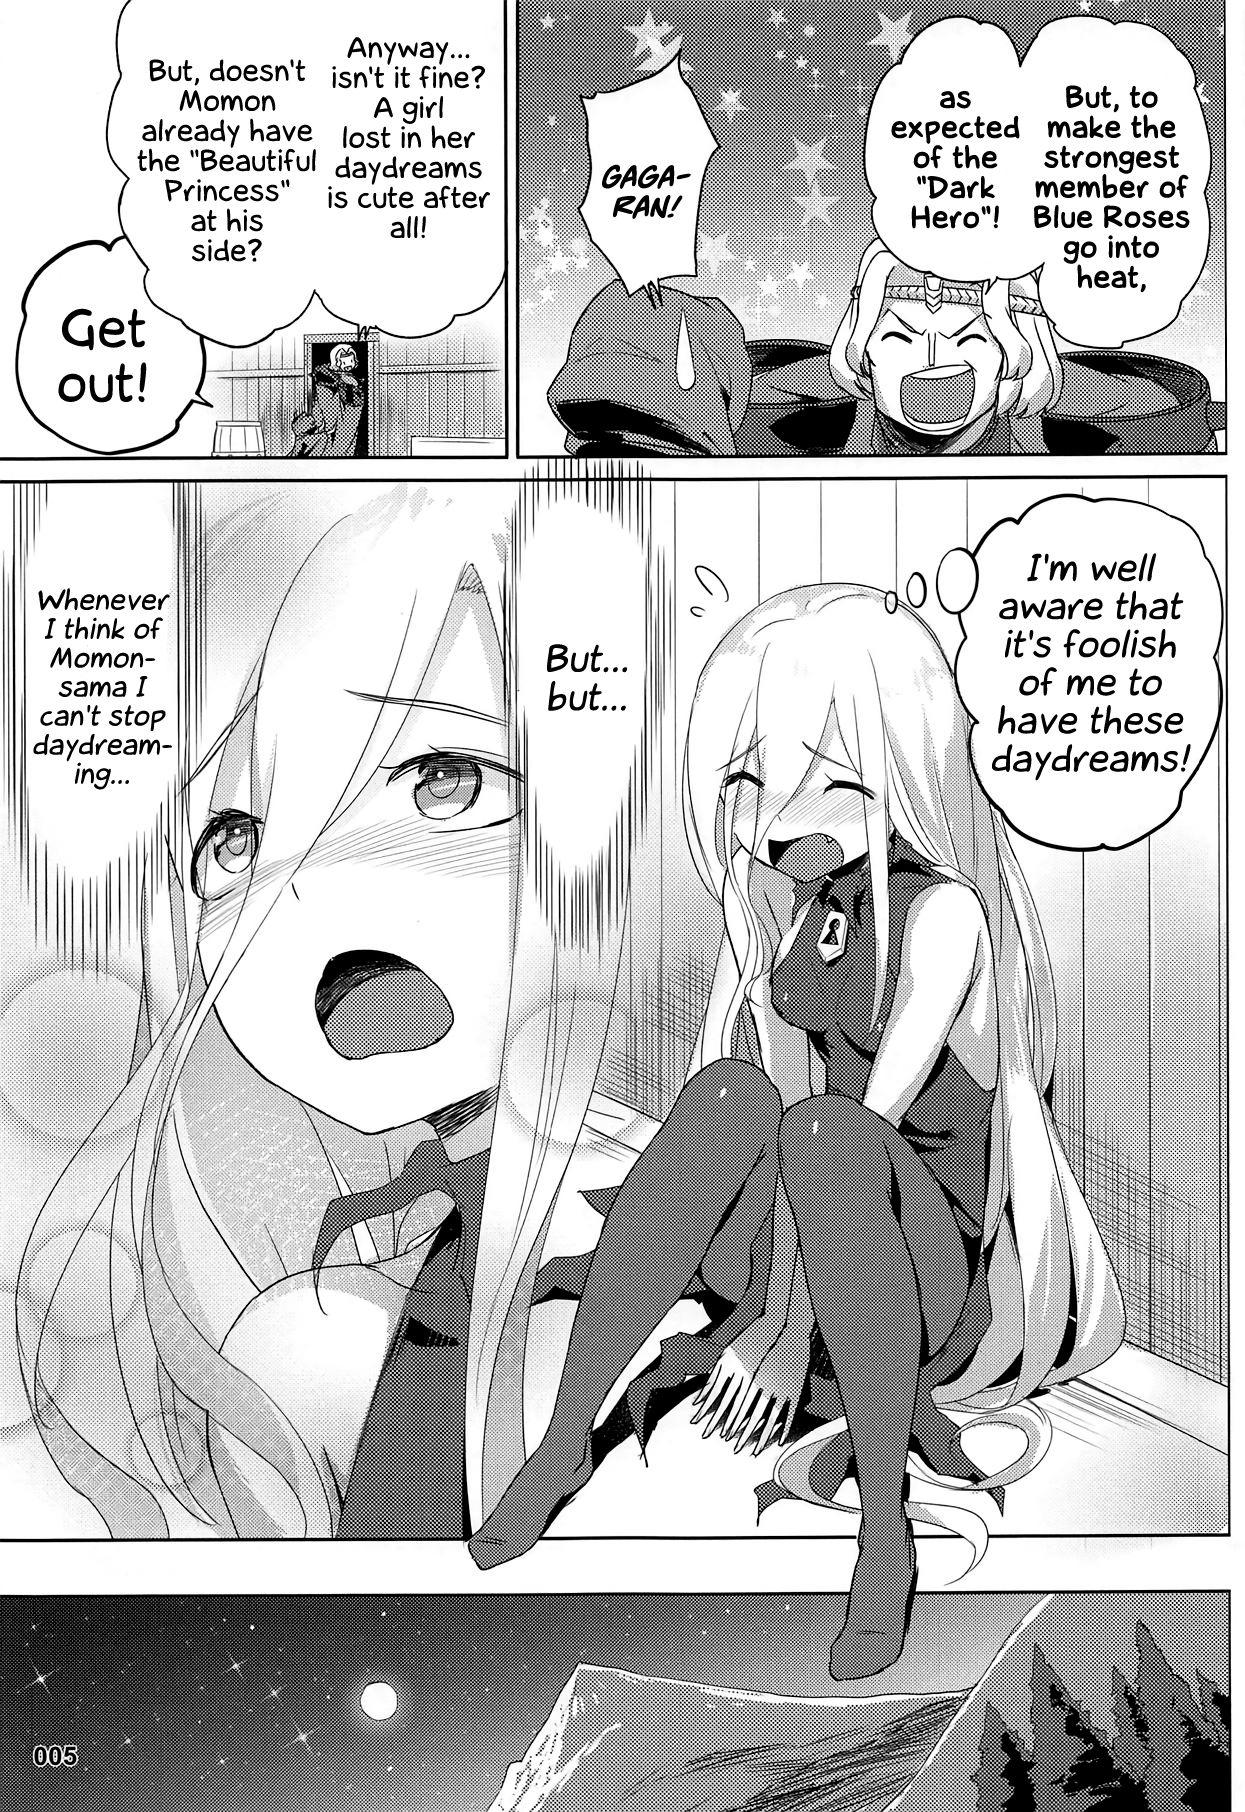 Stretching Evileye no Mousou Sex | Evileye's Daydream Sex - Overlord Audition - Page 6